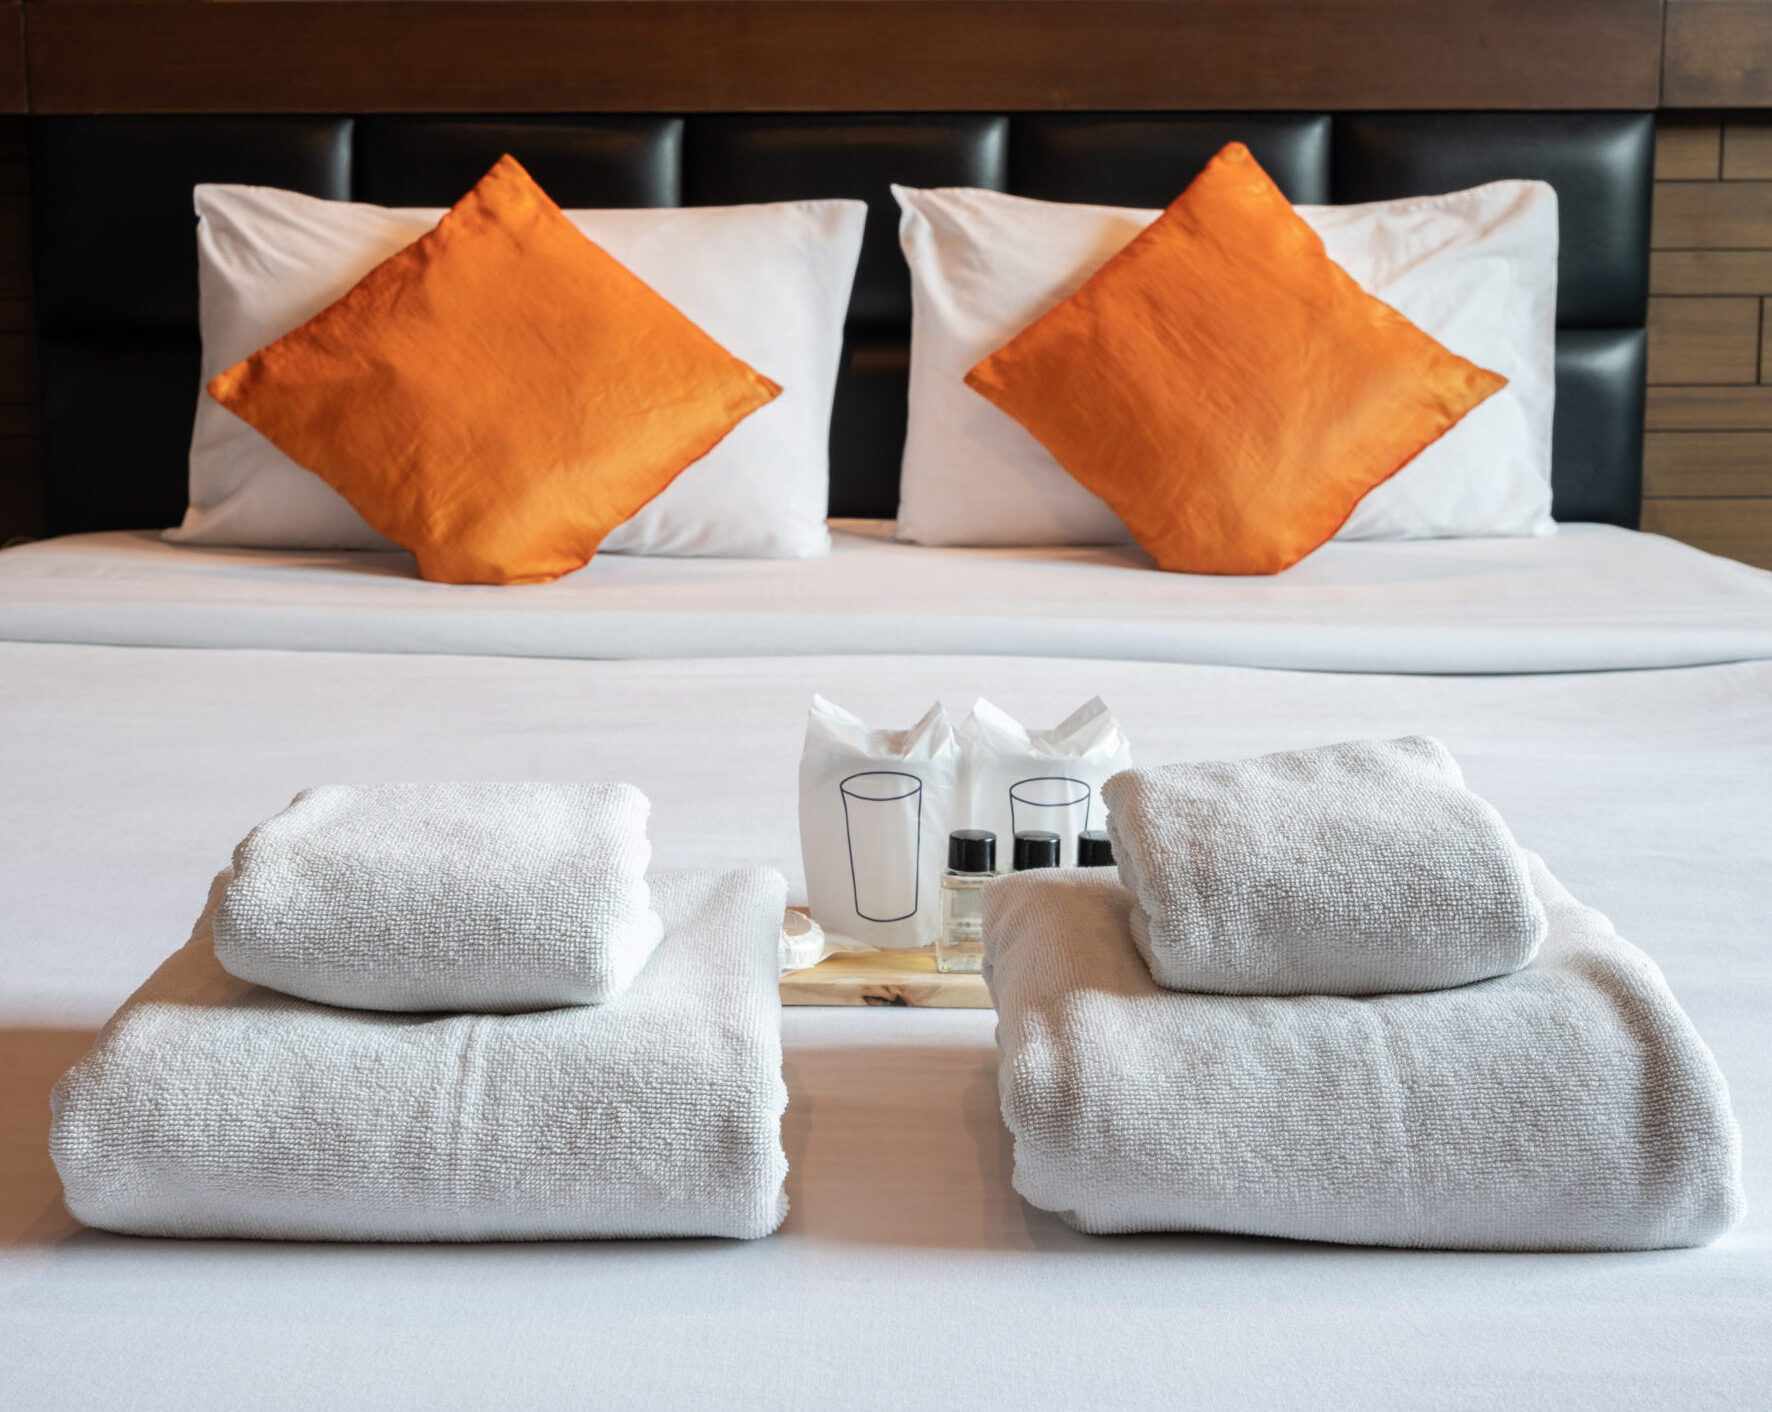 Hotel bed with orange decorative pillows and towels at the end of the bed